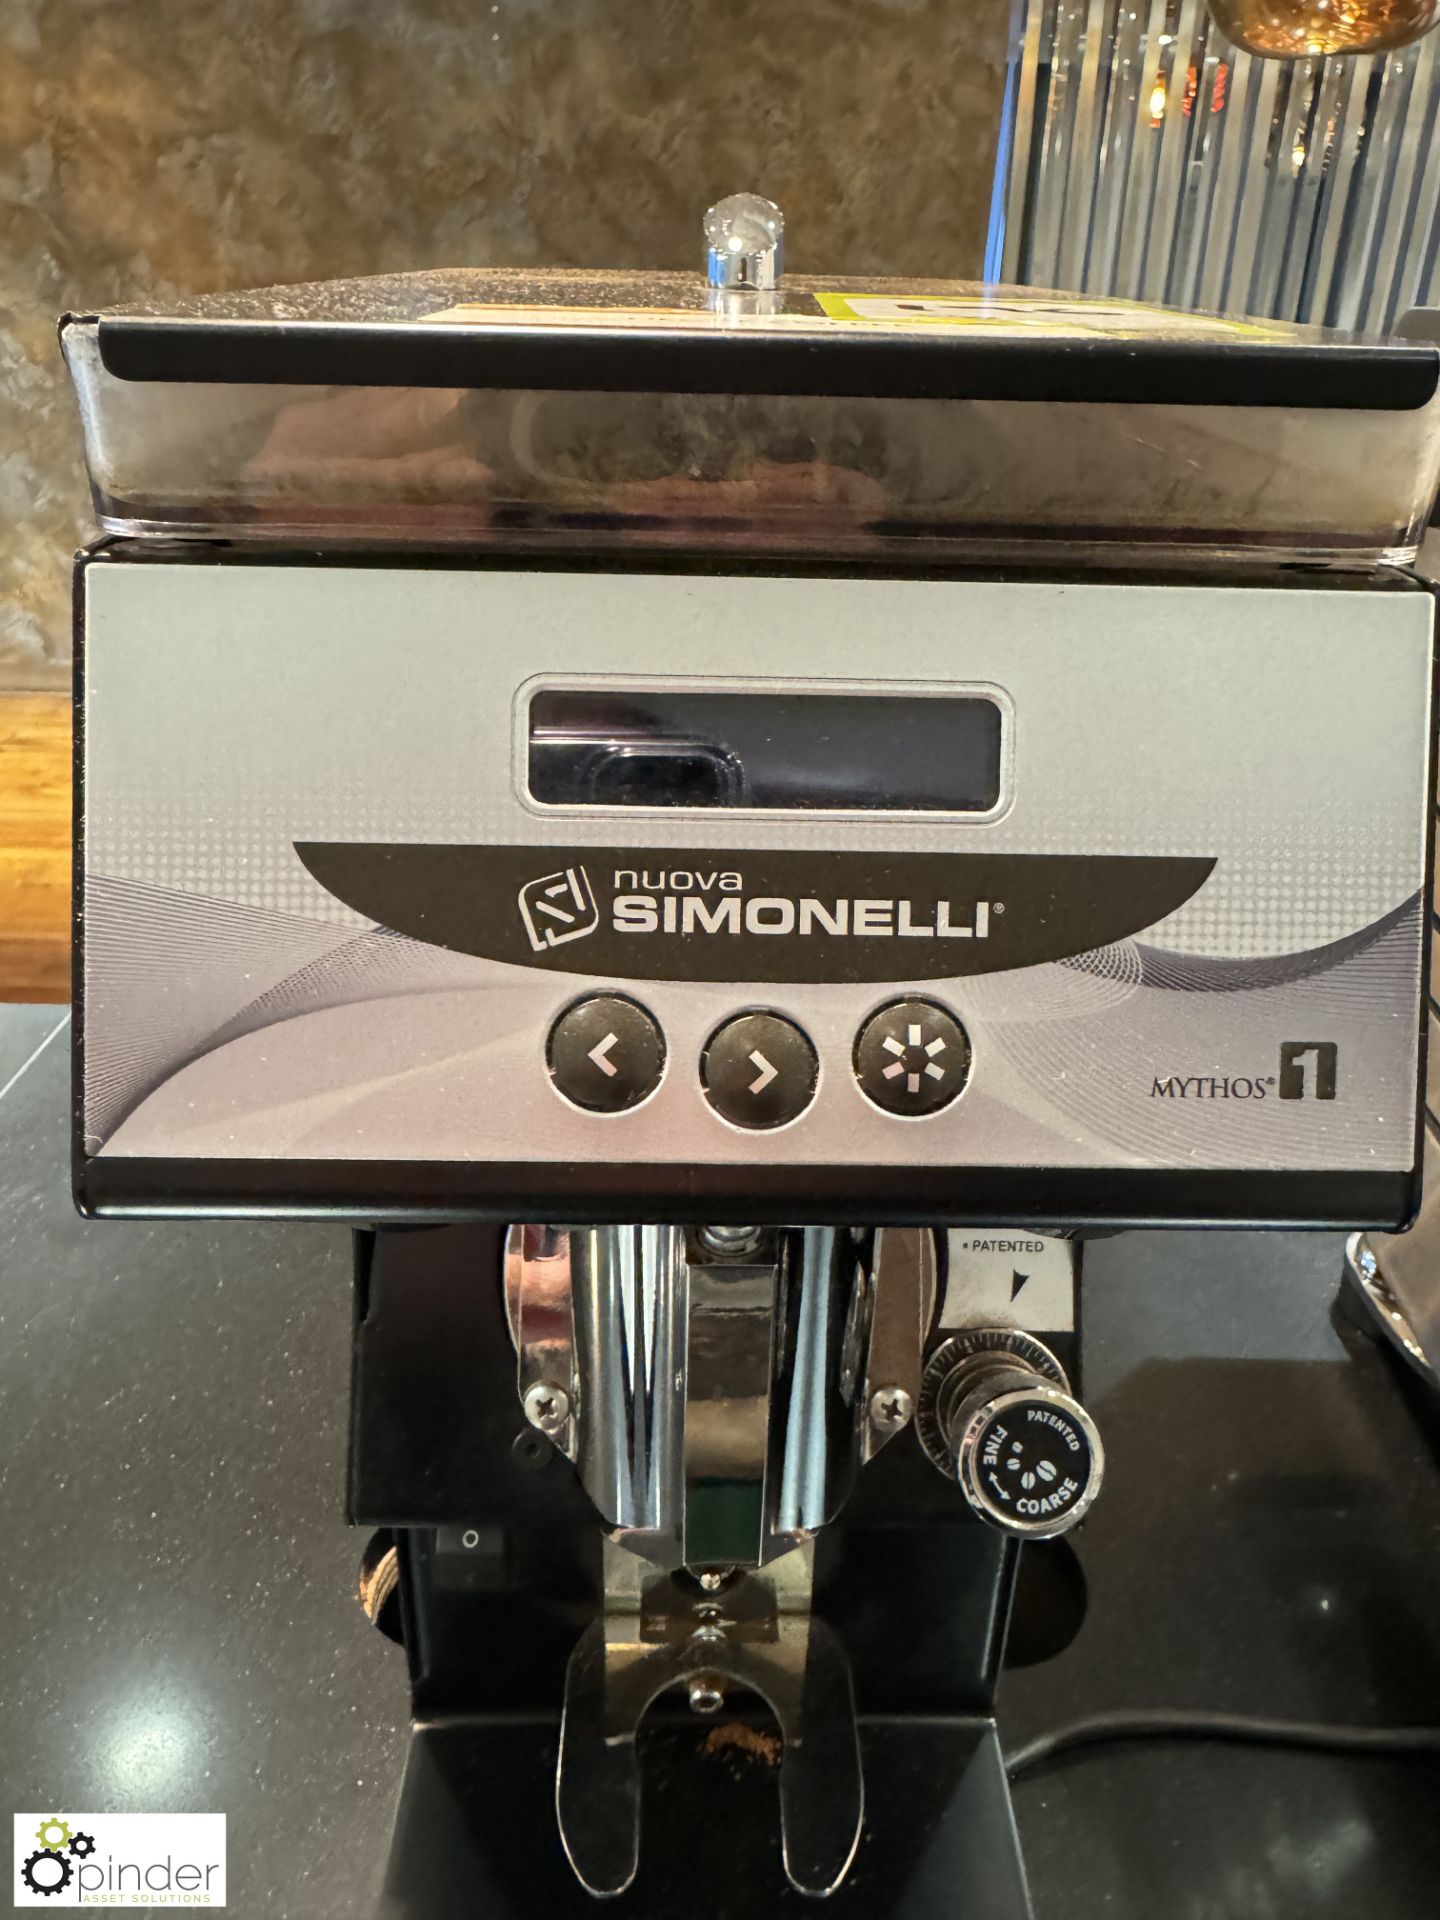 Nuova Simonelli Mythos 1 Coffee Grinder, 240volts (location in building - level 22 coffee shop) - Image 3 of 7